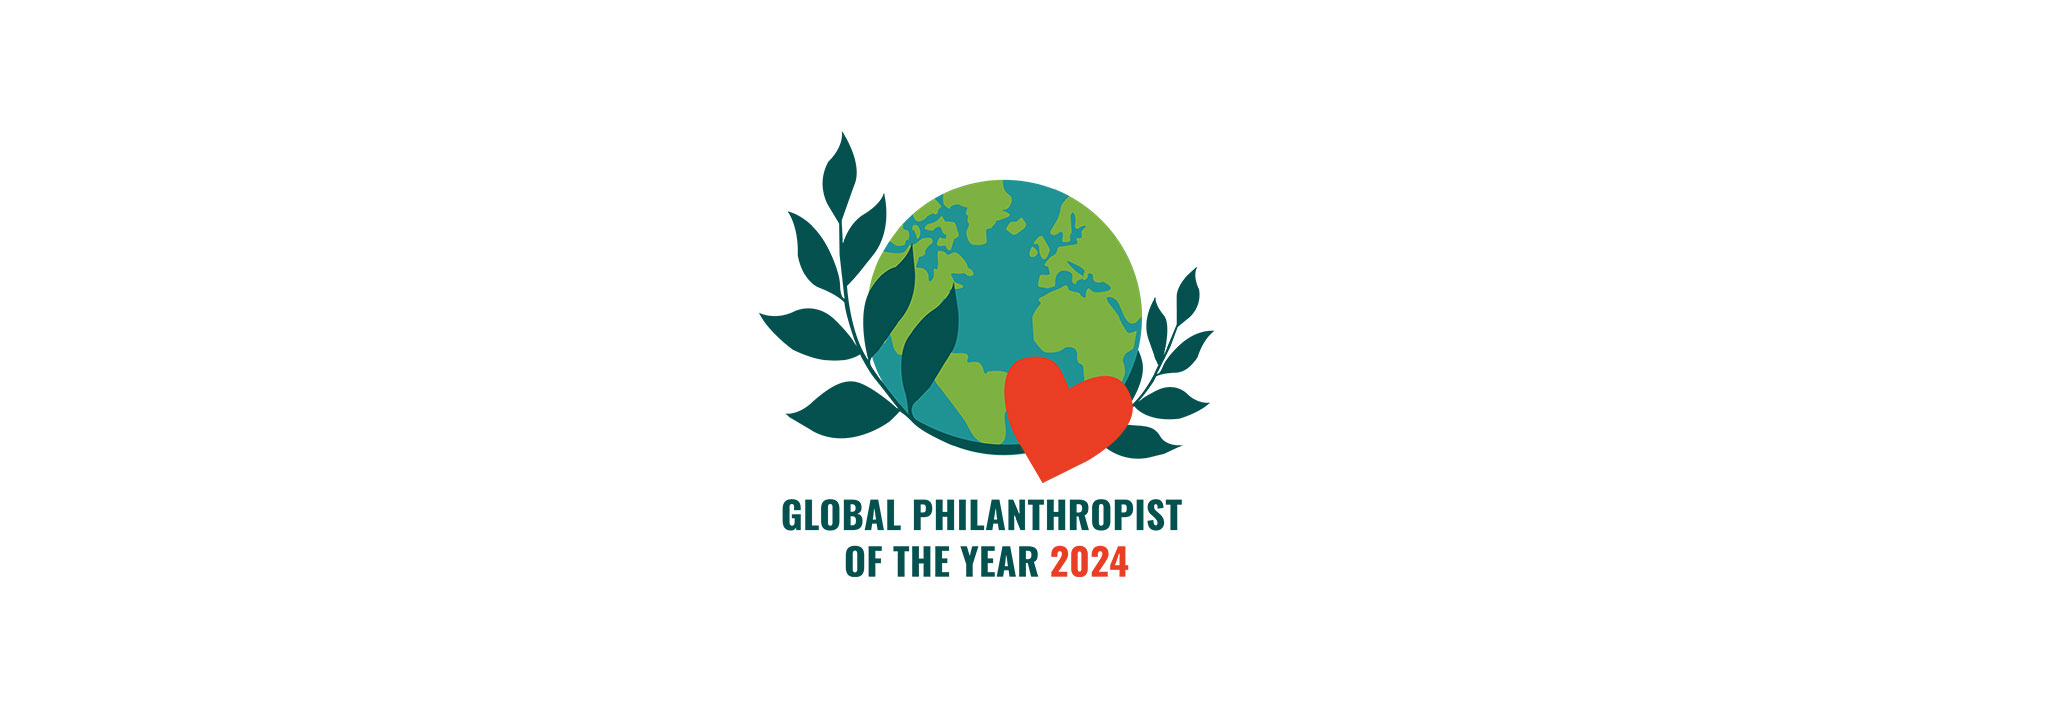 The logo of The Global Philanthropist of the Year 2024 award with green leaves, red heart and the globe.